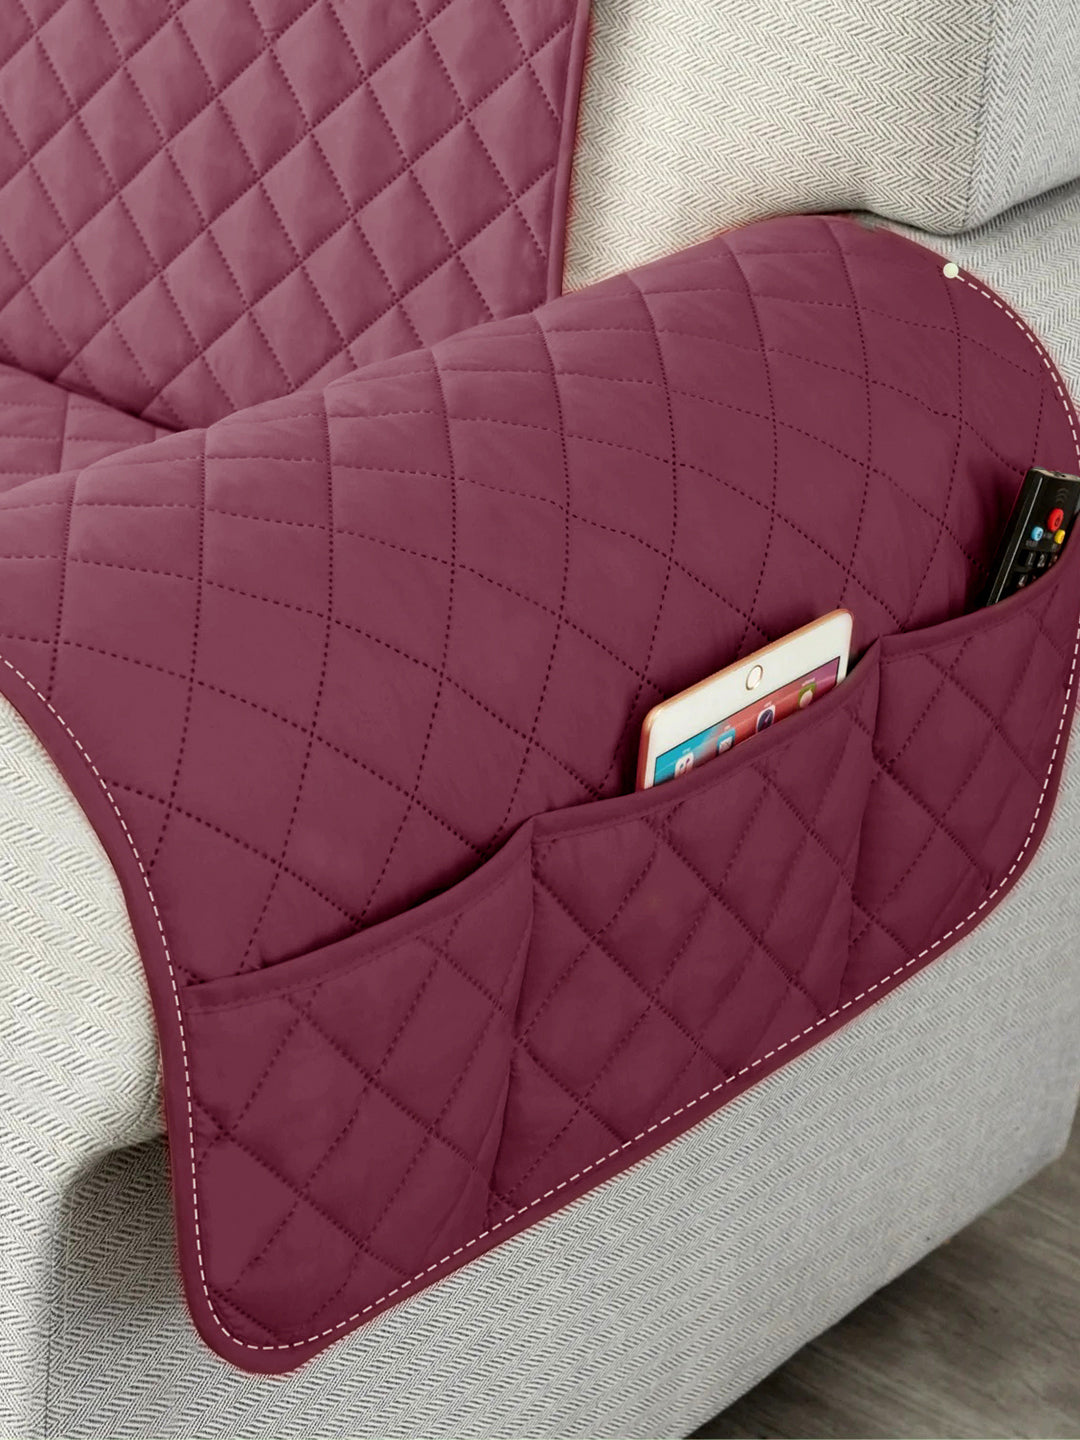 Reversible Quilted Polyester Solid Sofa Cover 2 Seater- Maroon & Grey